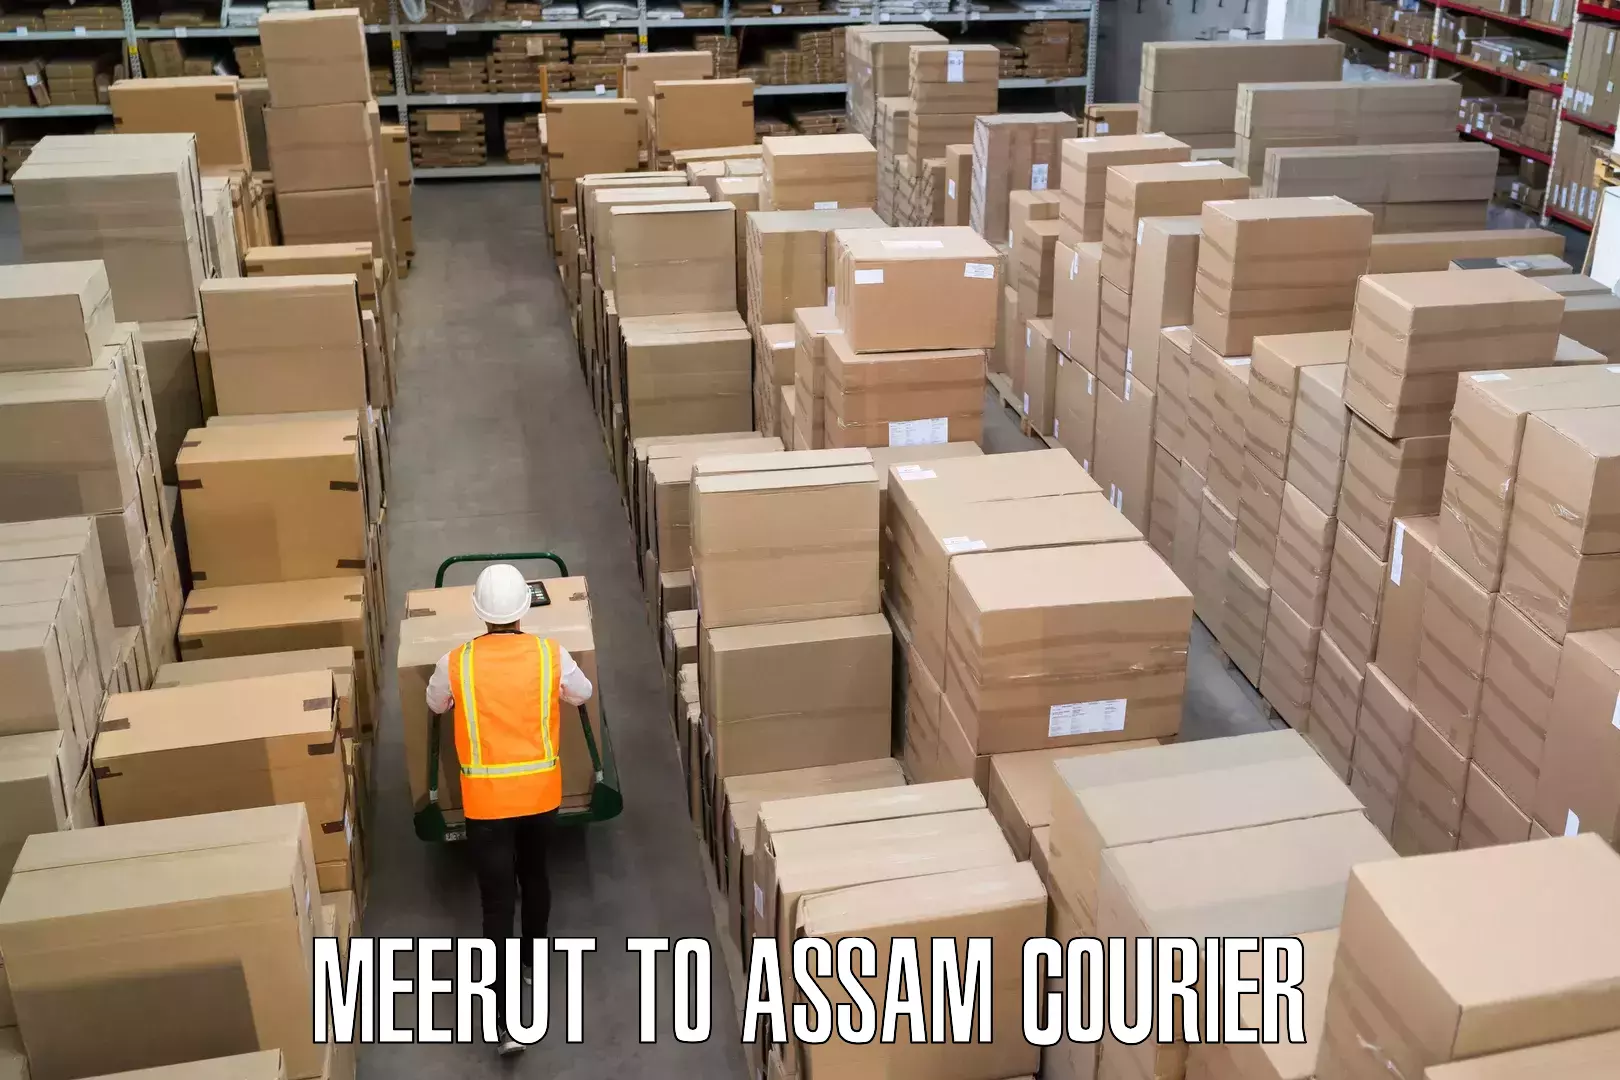 Luggage transport company Meerut to Assam